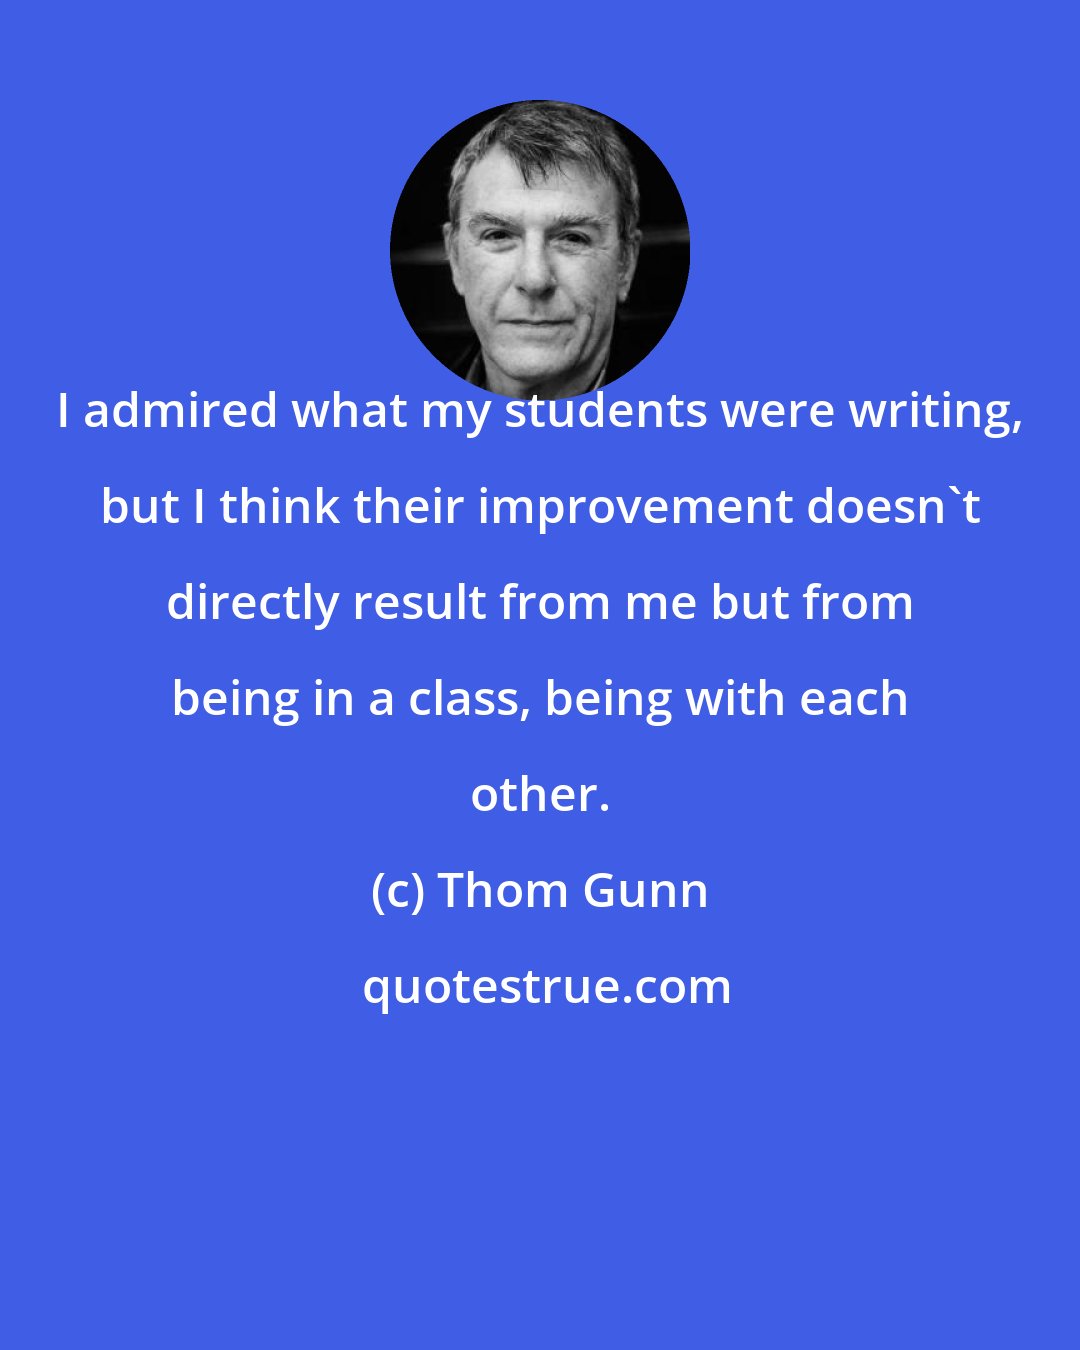 Thom Gunn: I admired what my students were writing, but I think their improvement doesn't directly result from me but from being in a class, being with each other.